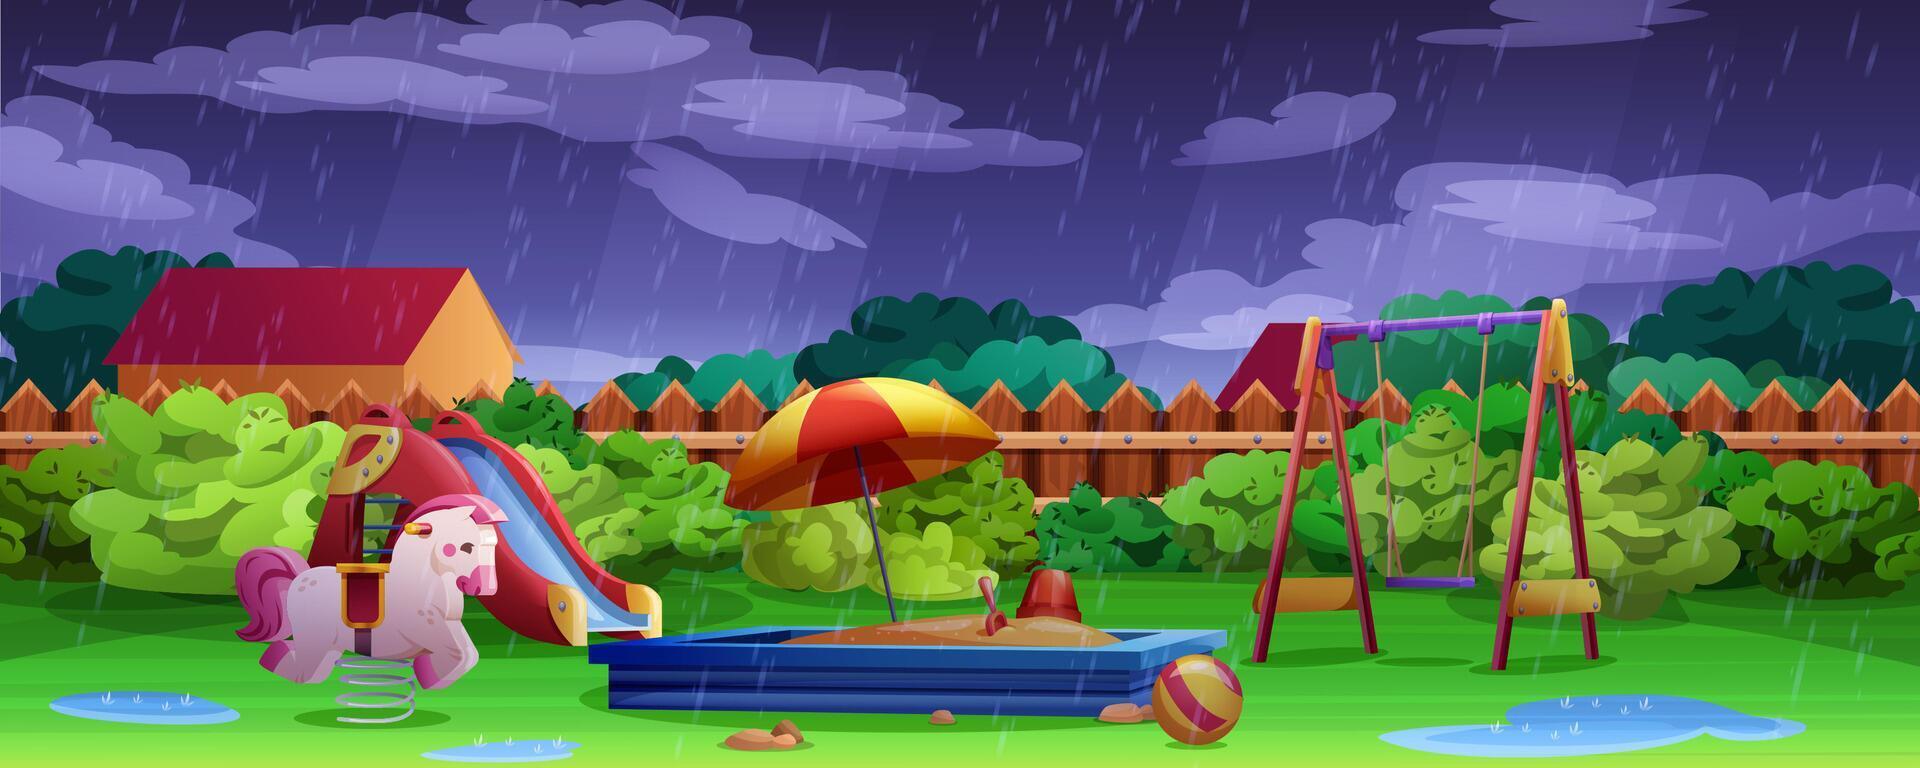 Kids playground at rainy weather with puddles. Summer garden with swing, slide and sandbox. Play area in backyard with lawn, sandpit and seesaw. Vector cartoon illustration activities for children